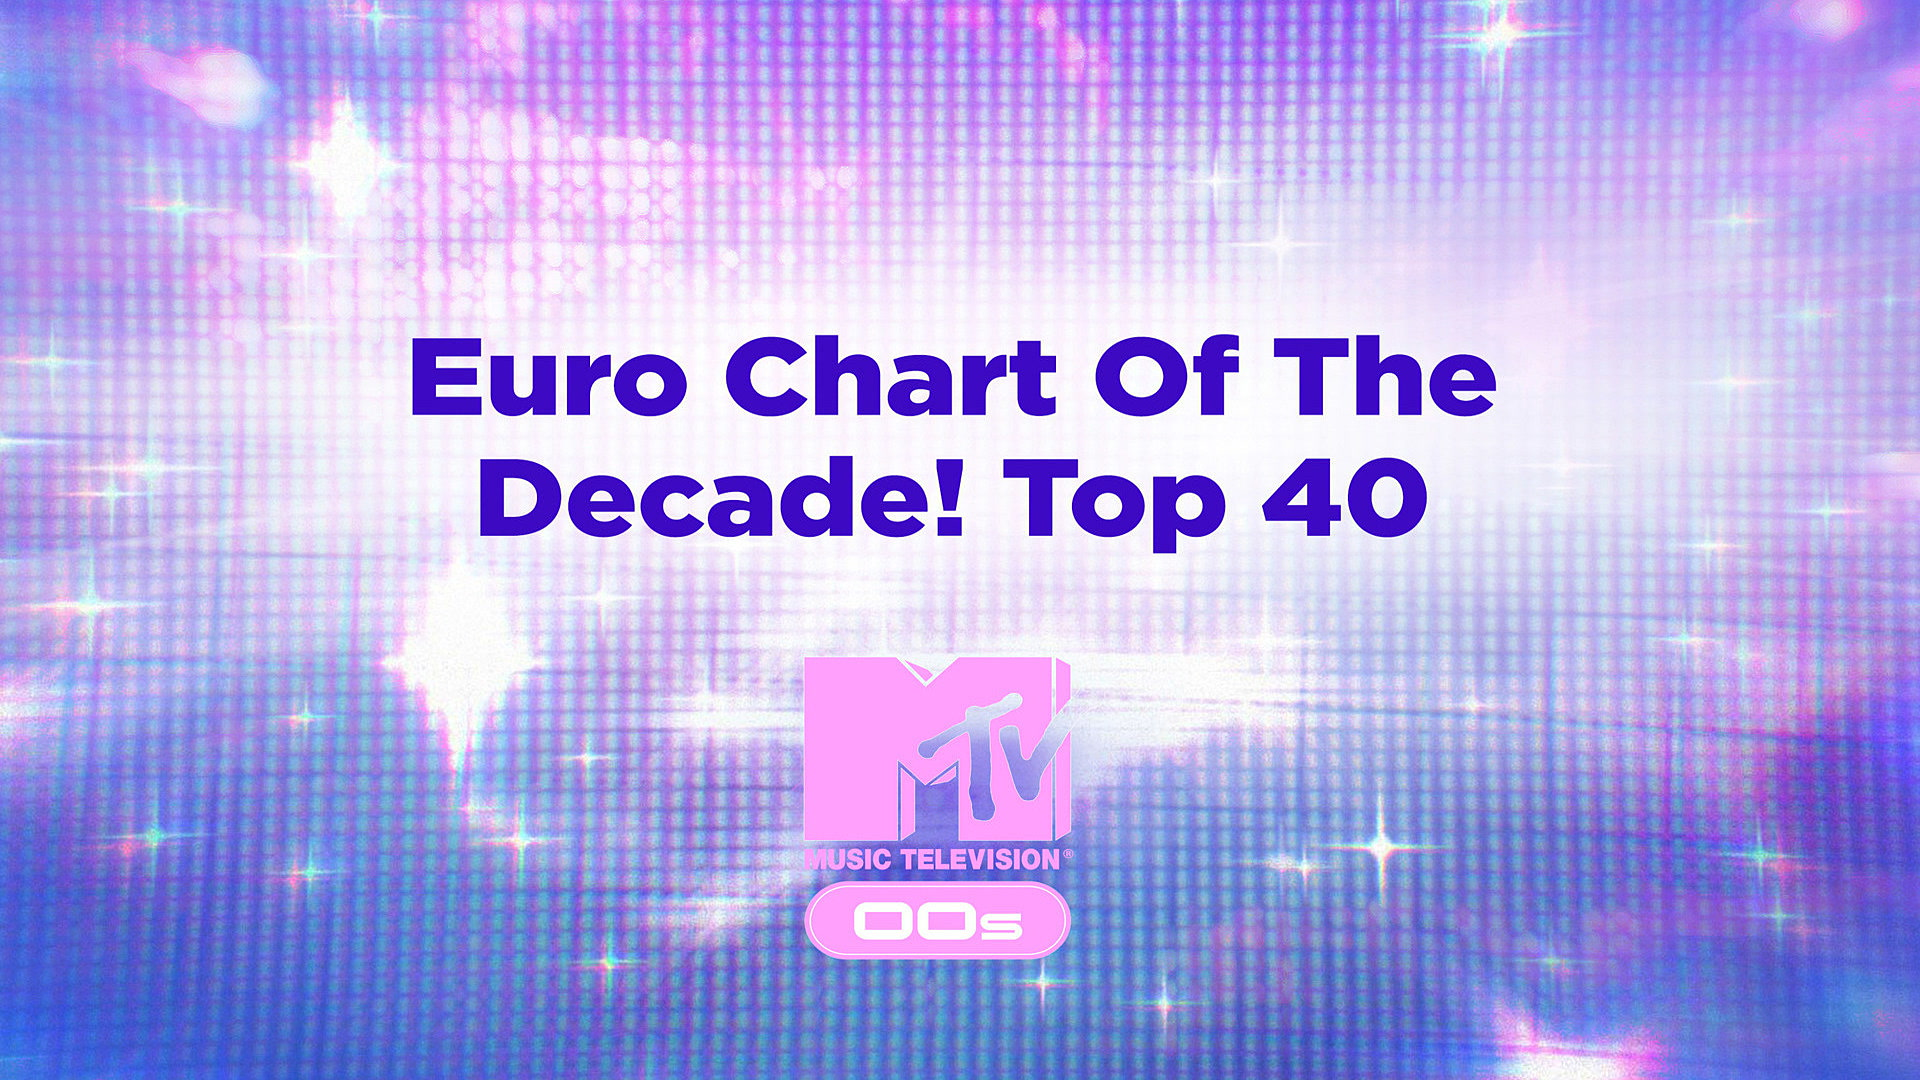 Euro Chart Of The Decade! Top 40